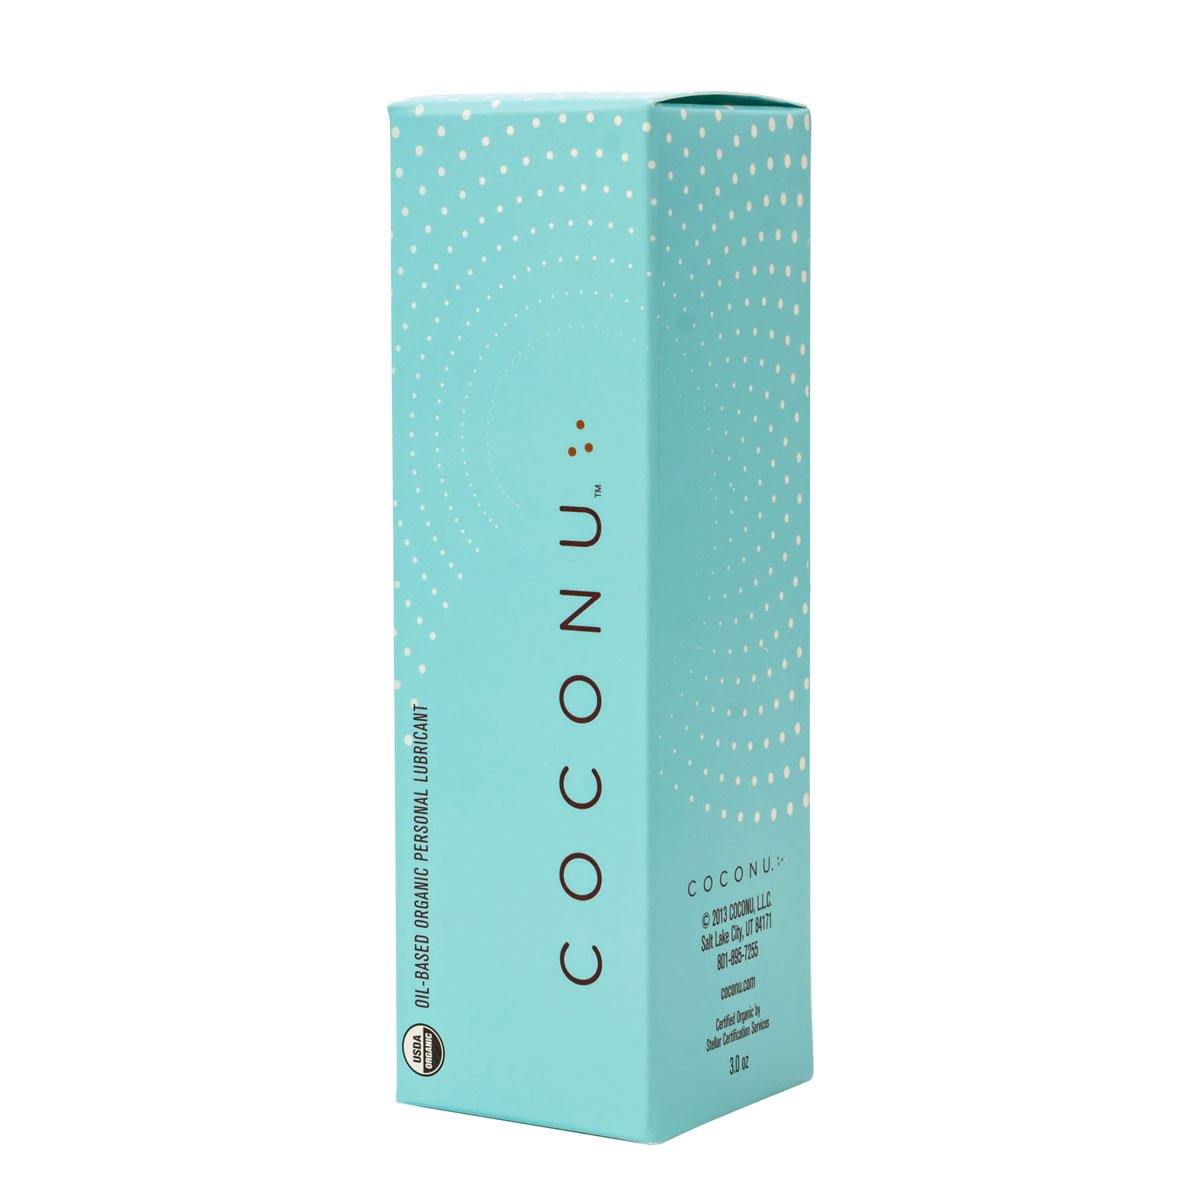 Coconu Oil-Based Organic Lubricant 3oz - Buy At Luxury Toy X - Free 3-Day Shipping